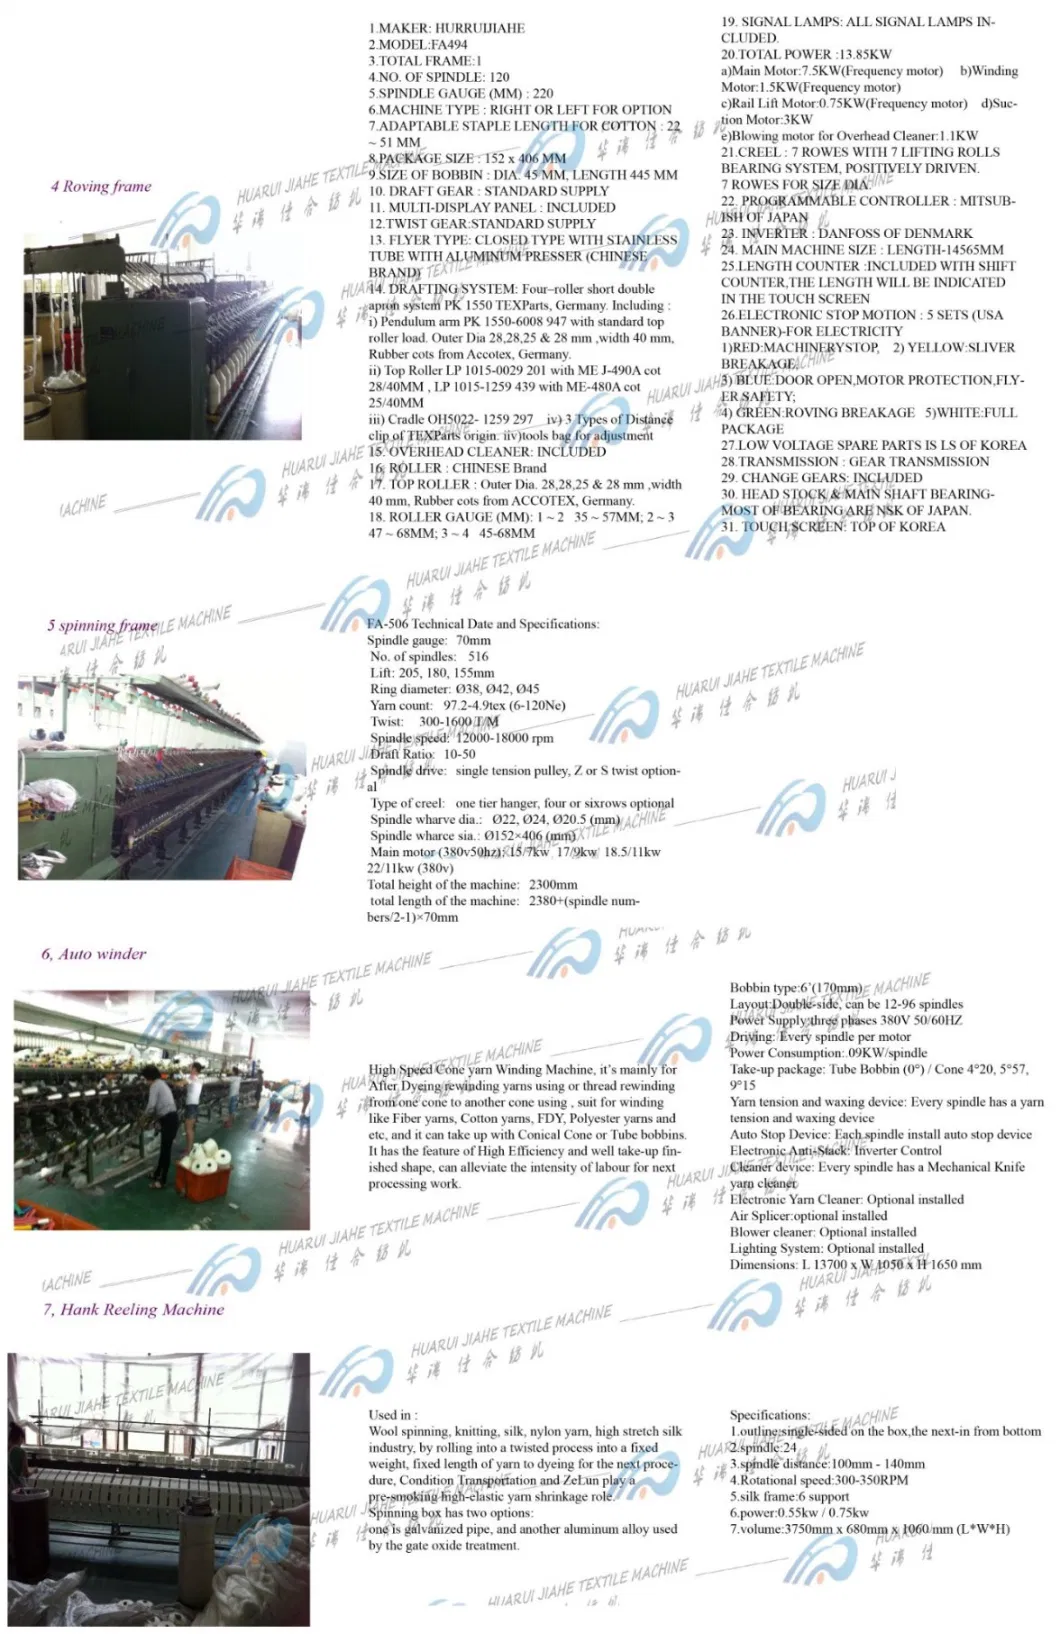 Machine Blended Cashmere and Cotton Thread/ Viscose Nylon Fancy Yarn Spinning Machine Made in China Supplier Smart Worsted Wool Yarn Textile Machine